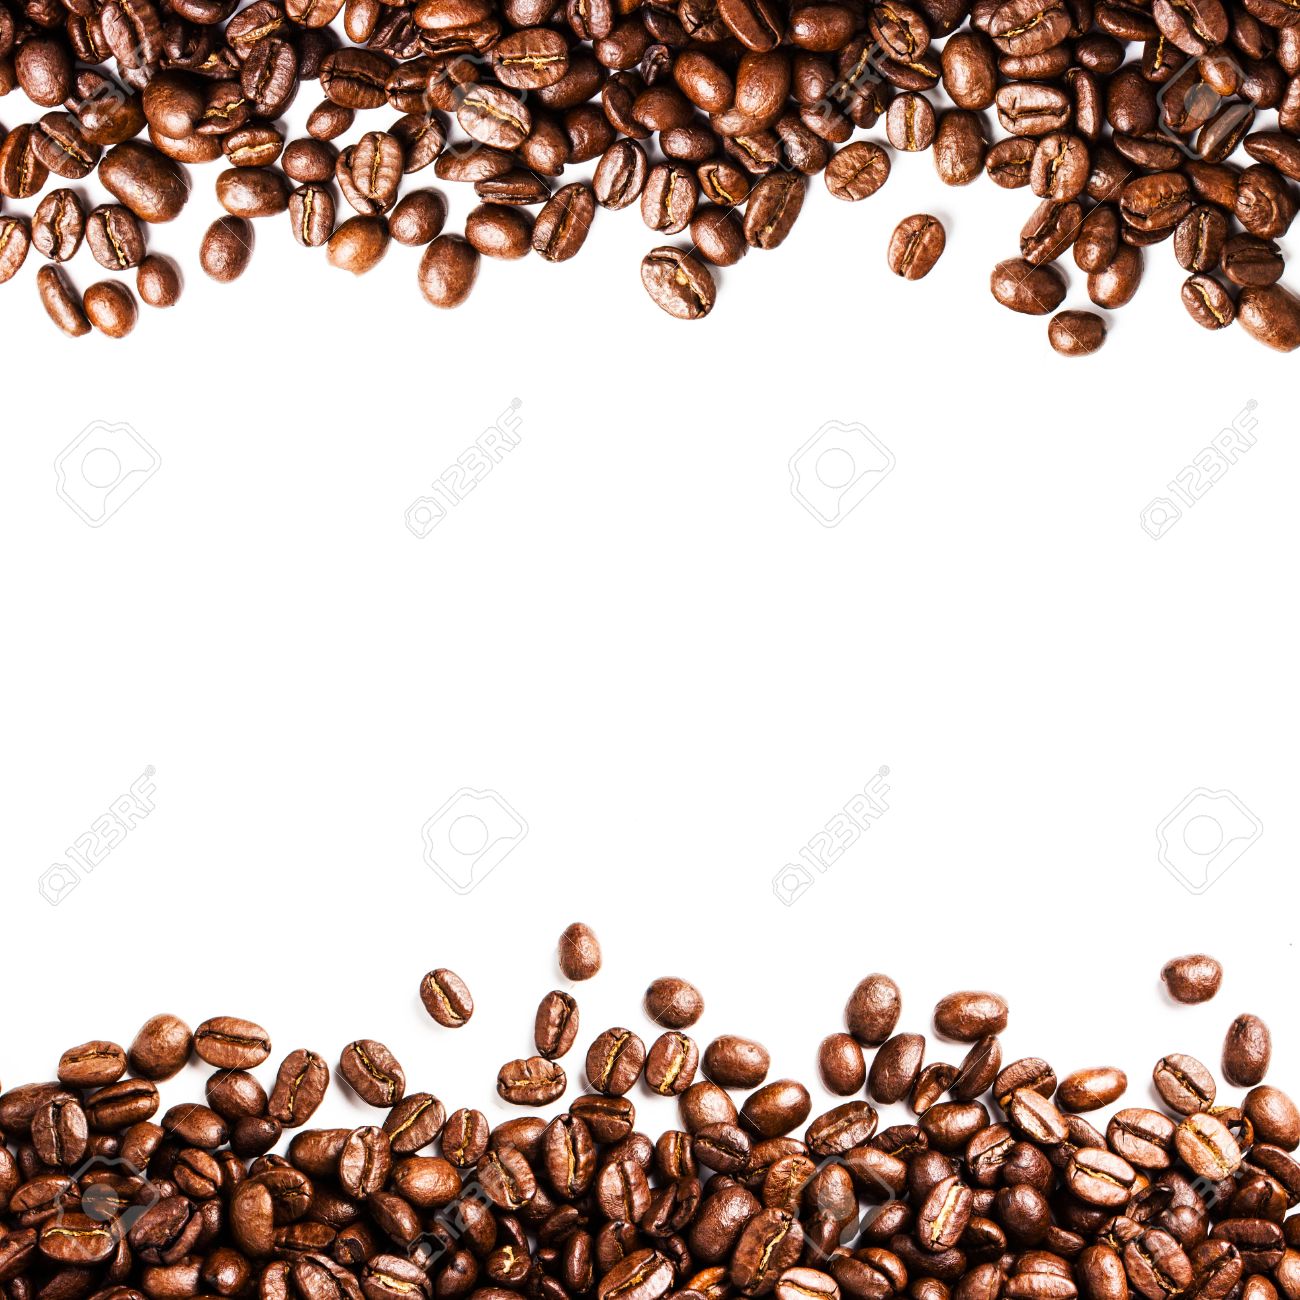 Roasted Coffee Bean Background Isolated On White